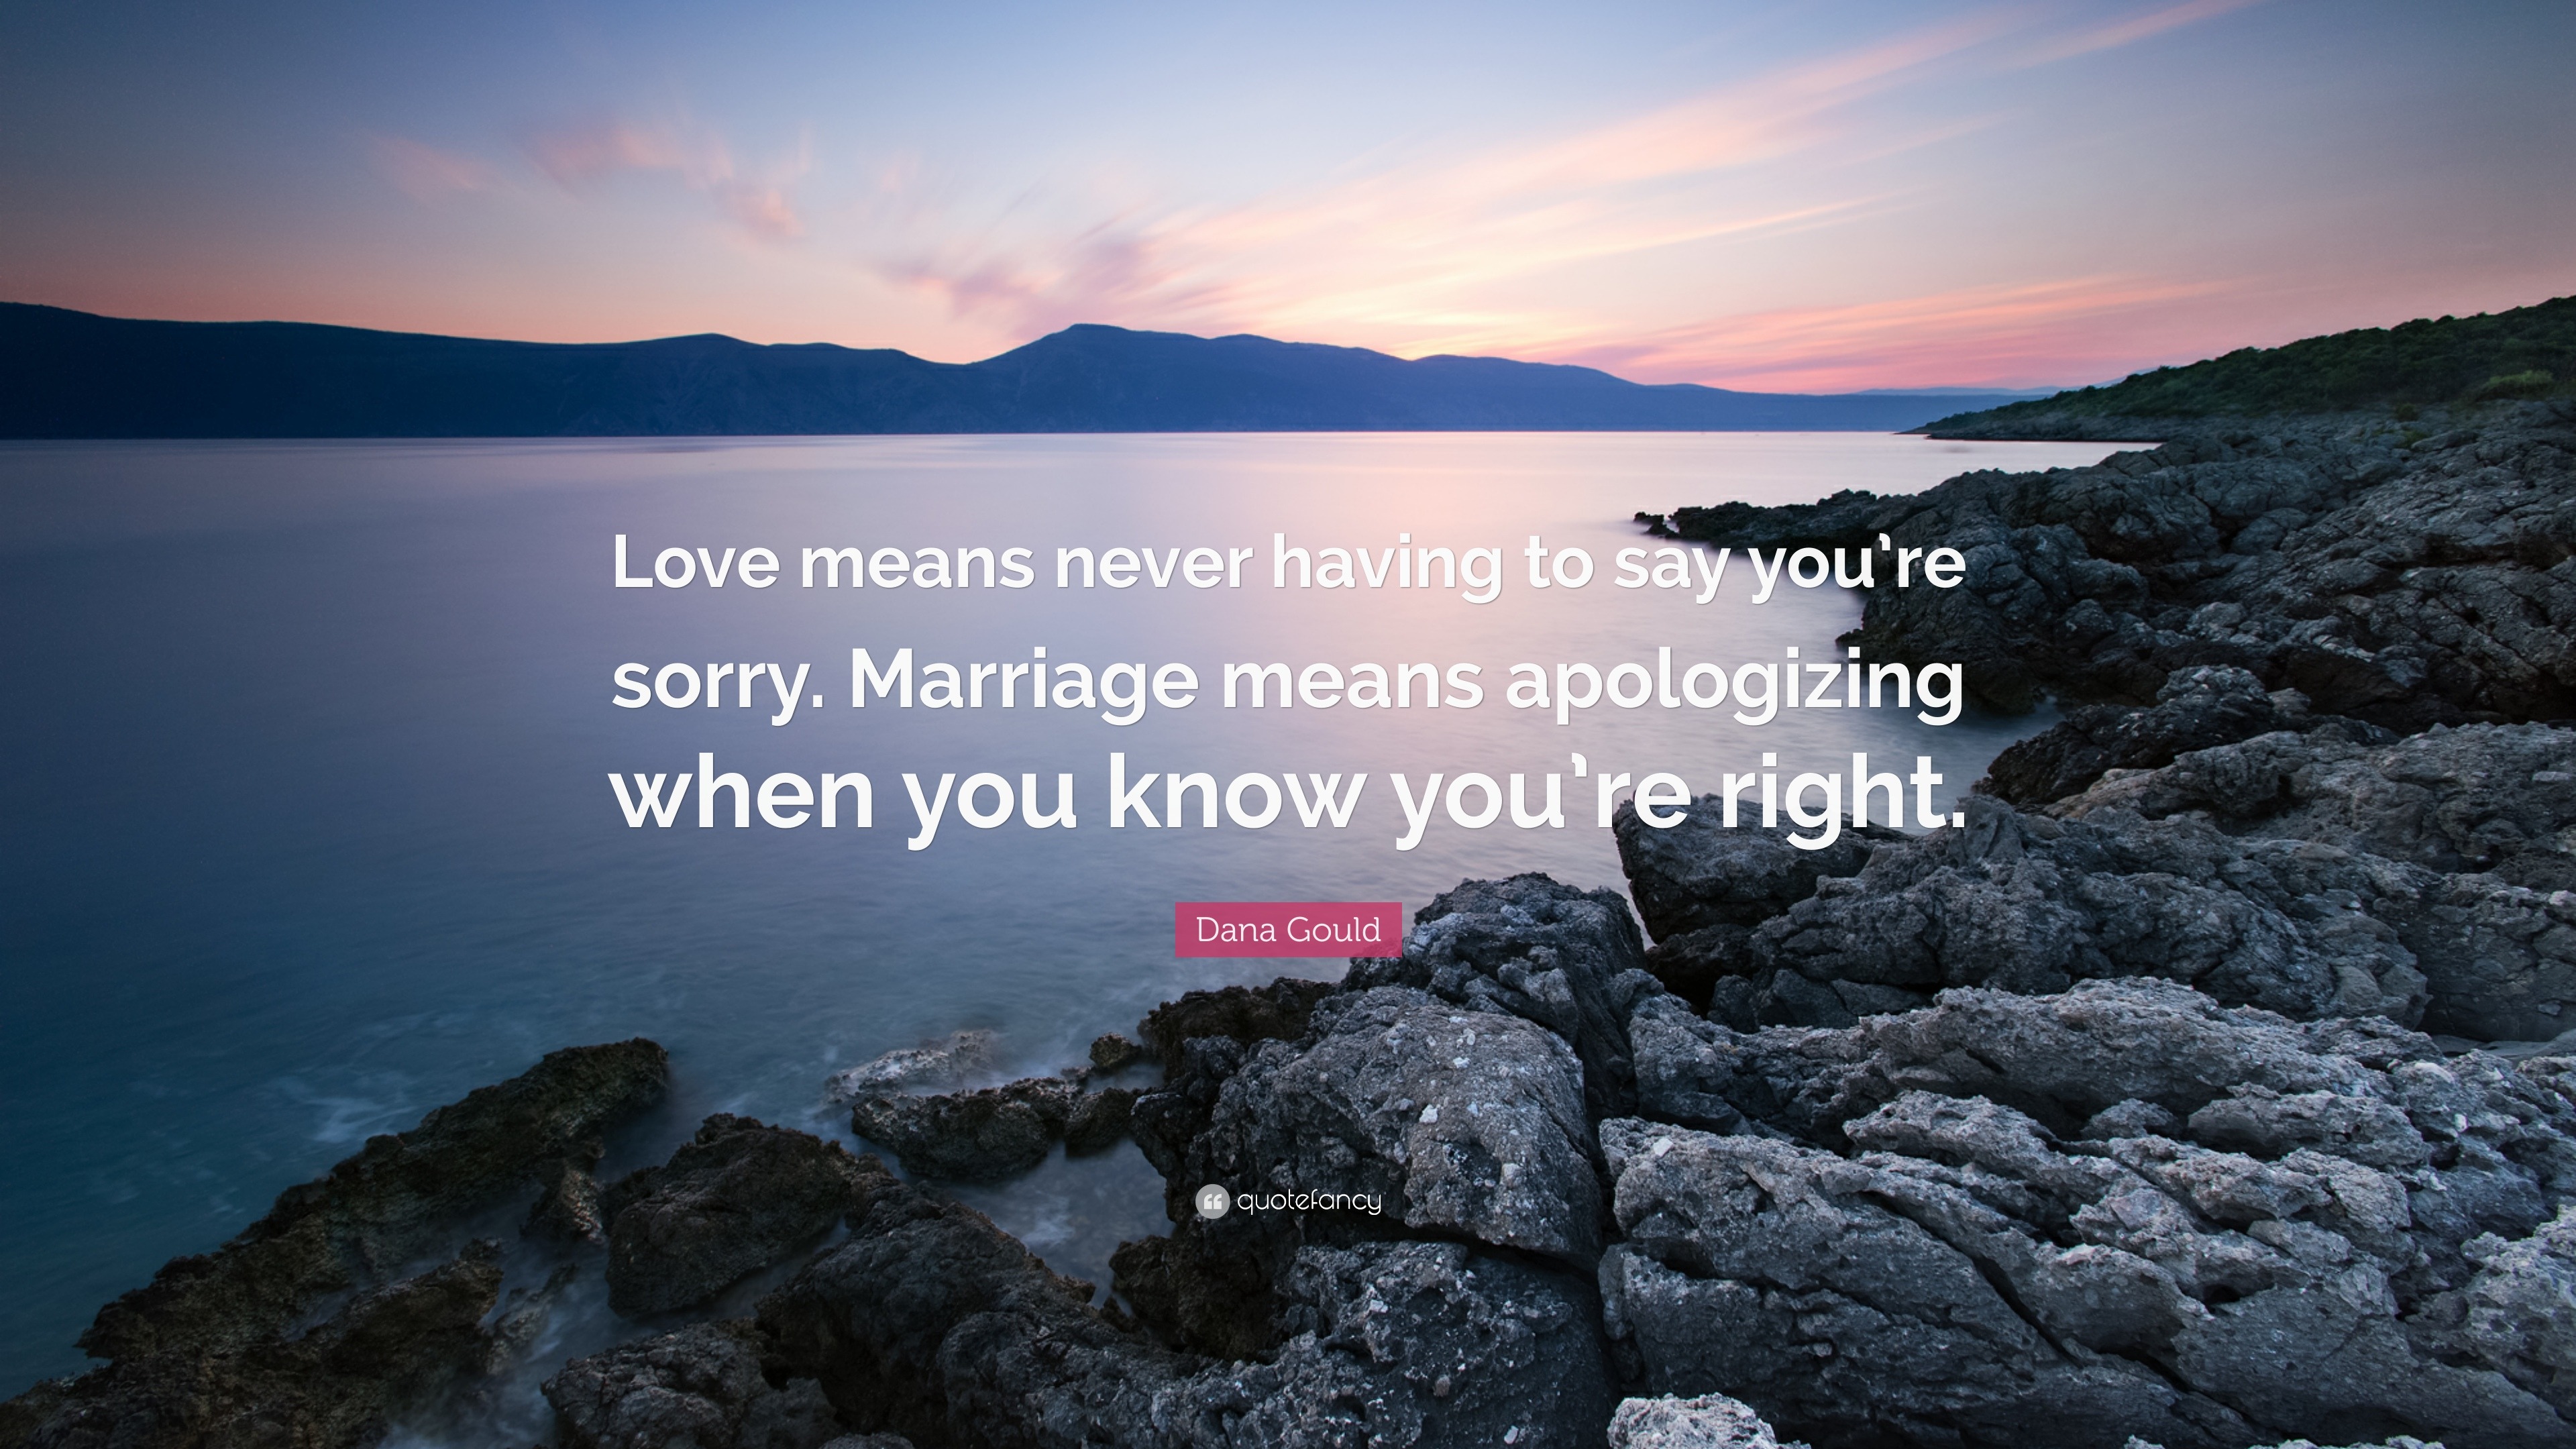 Dana Gould Quote “Love means never having to say you re sorry